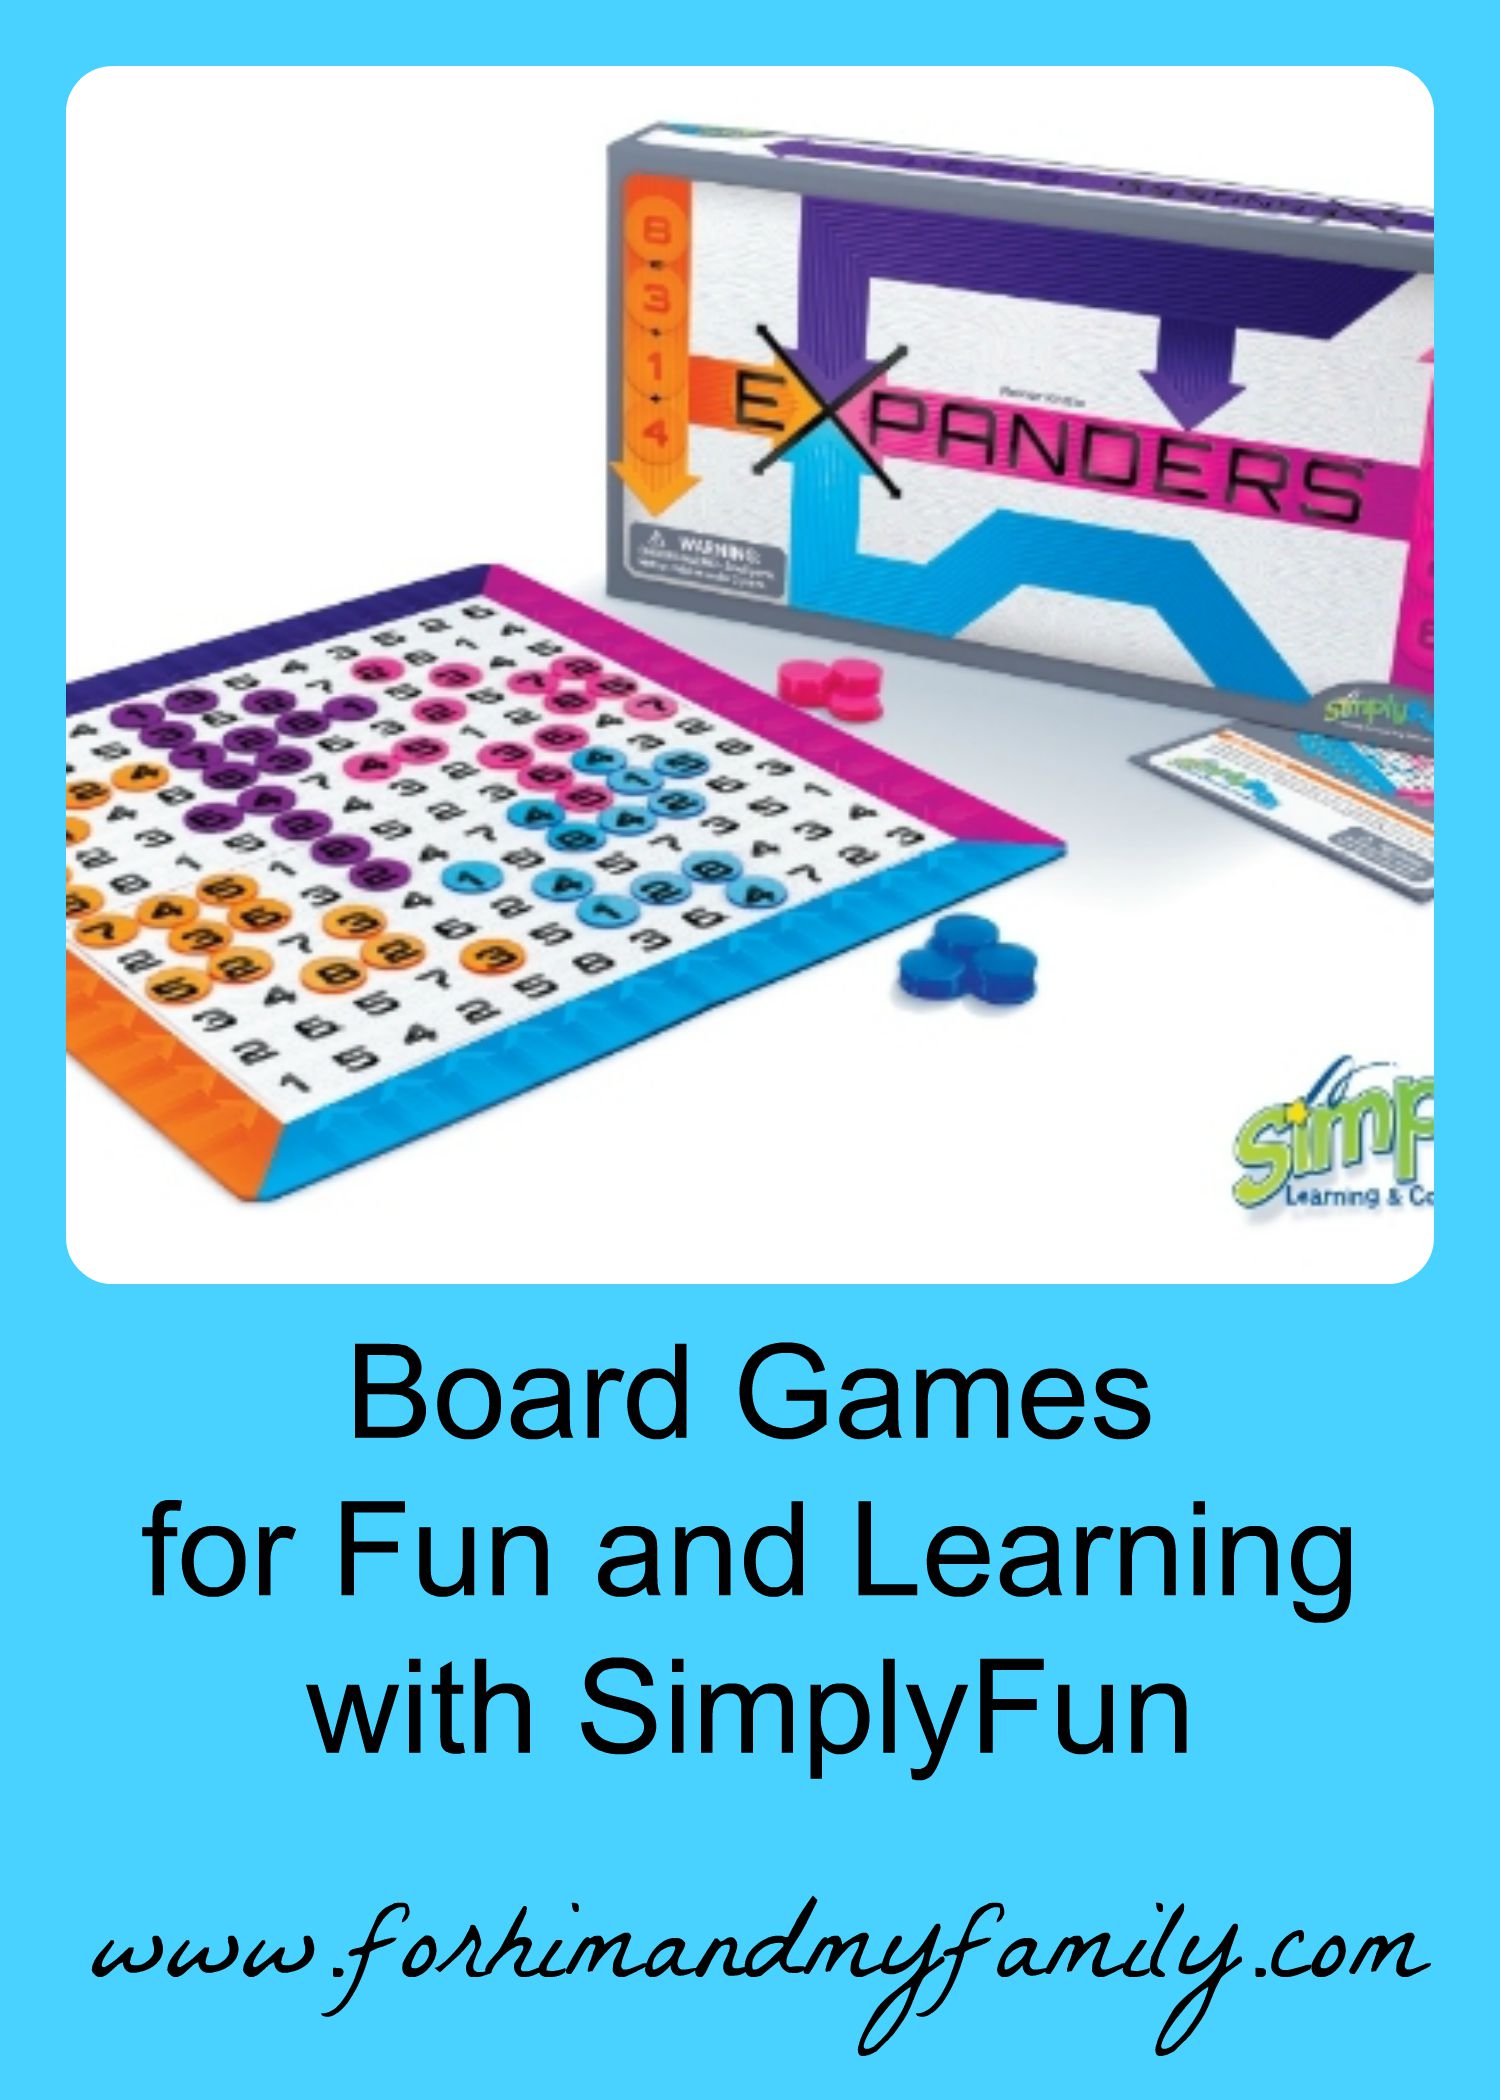 Board Games for Learning and Fun